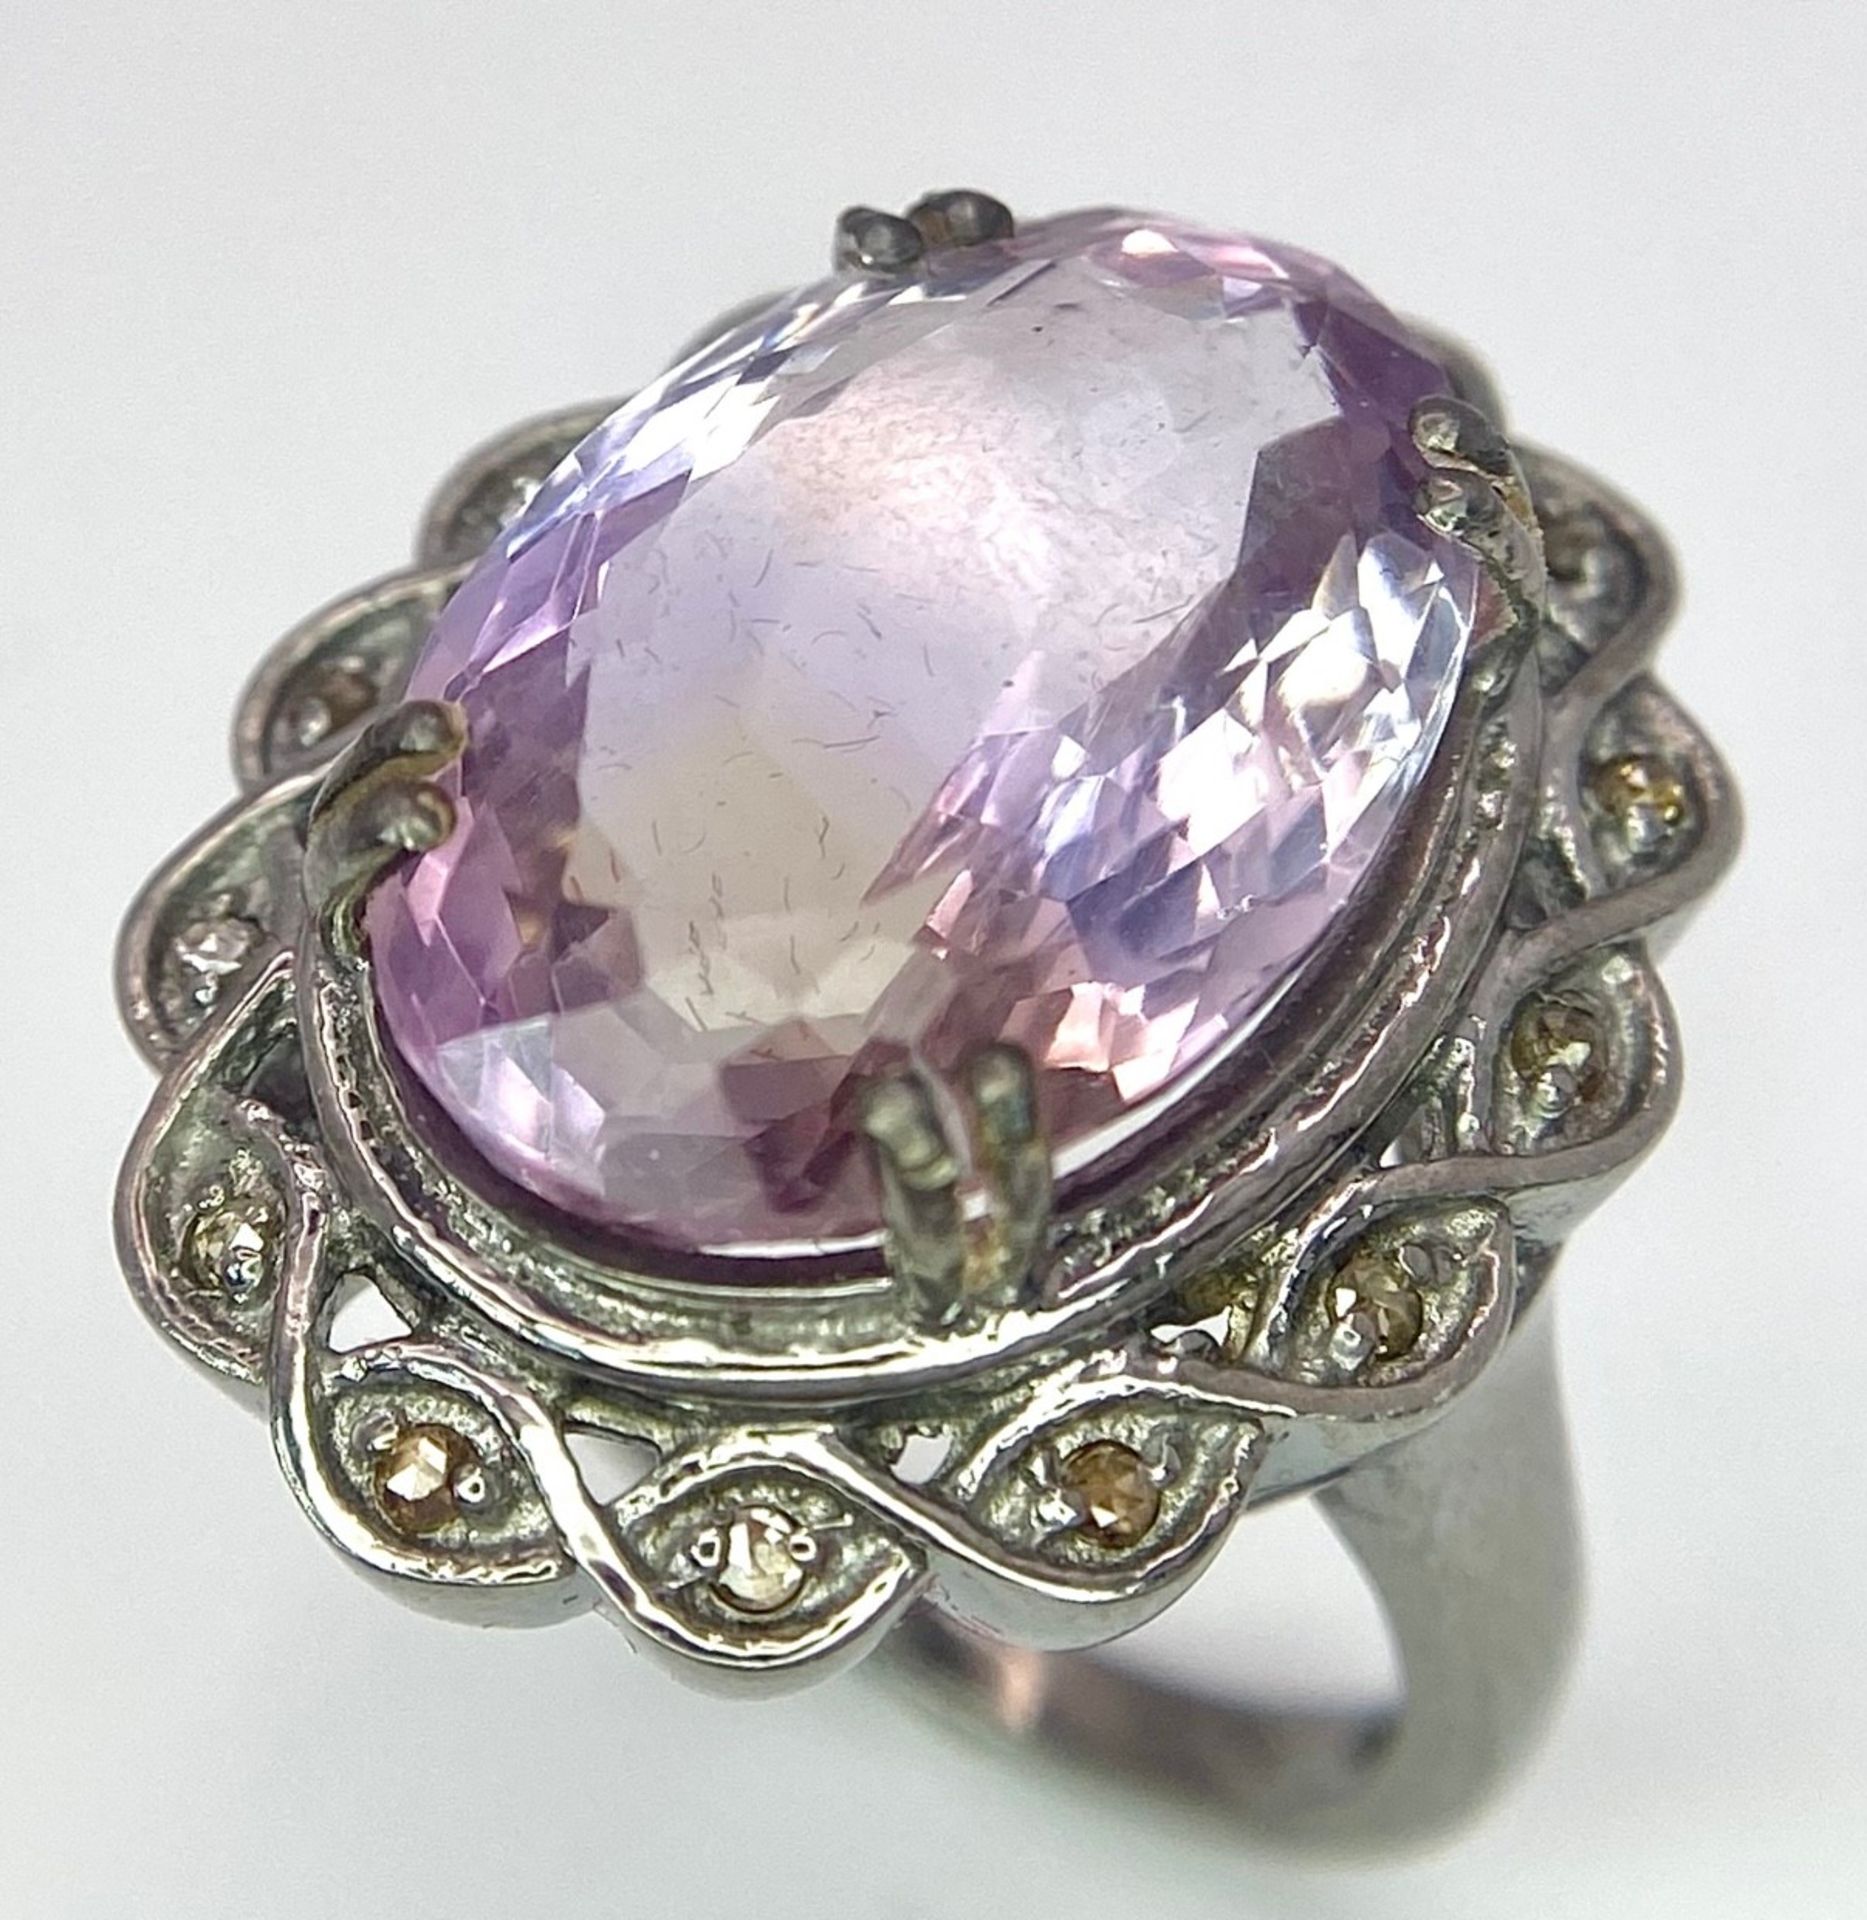 An 11.65ct Amethyst Ring with 0.25ctw of Diamond Accents. Set in 925 Silver. Size N. 9.4g total - Image 4 of 6